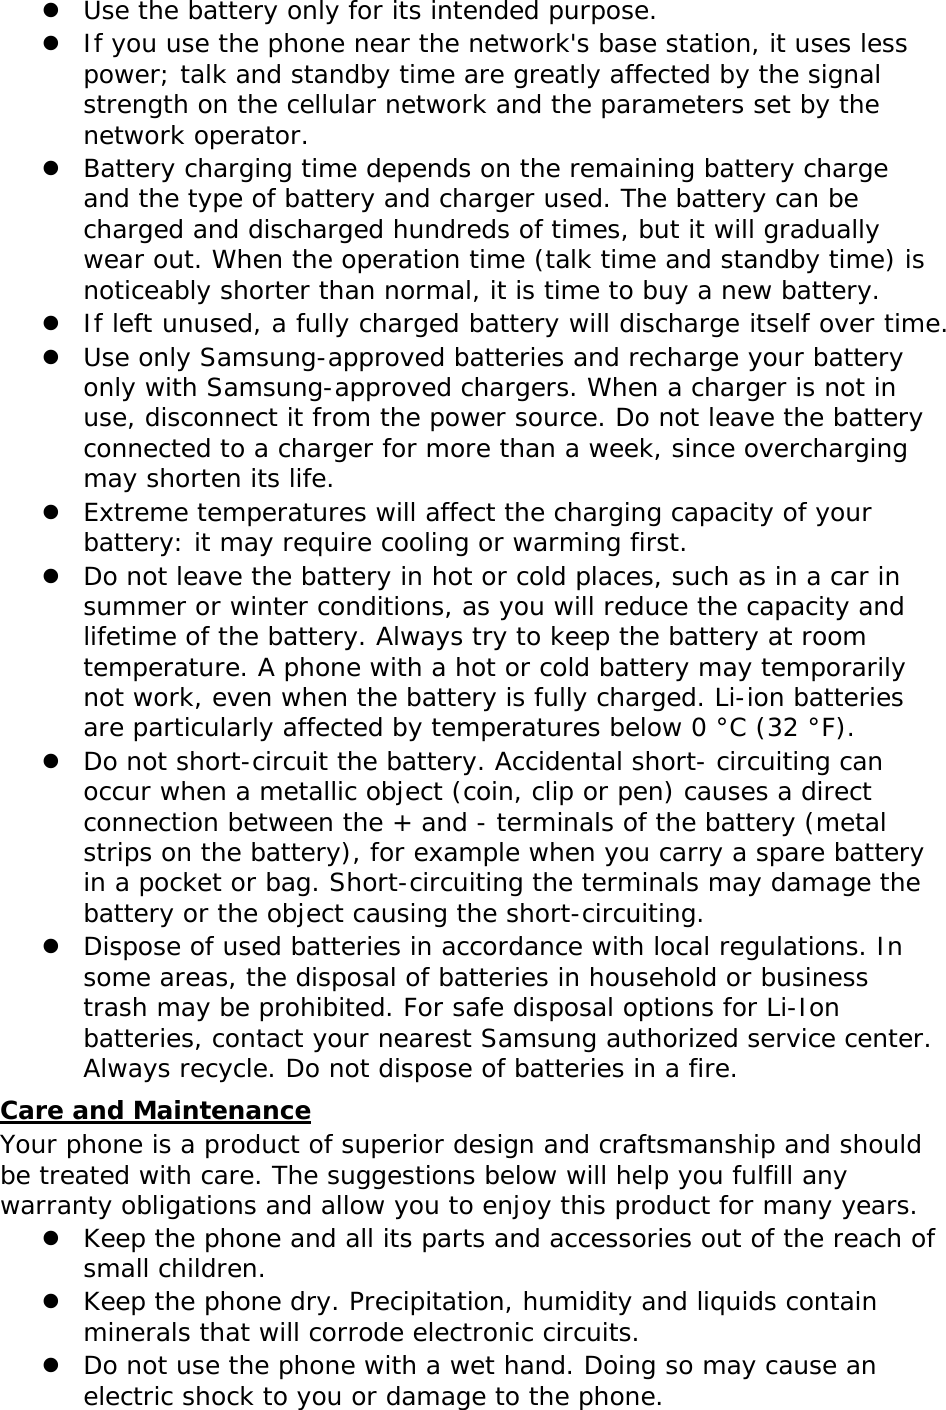 z Use the battery only for its intended purpose. z If you use the phone near the network&apos;s base station, it uses less power; talk and standby time are greatly affected by the signal strength on the cellular network and the parameters set by the network operator. z Battery charging time depends on the remaining battery charge and the type of battery and charger used. The battery can be charged and discharged hundreds of times, but it will gradually wear out. When the operation time (talk time and standby time) is noticeably shorter than normal, it is time to buy a new battery. z If left unused, a fully charged battery will discharge itself over time. z Use only Samsung-approved batteries and recharge your battery only with Samsung-approved chargers. When a charger is not in use, disconnect it from the power source. Do not leave the battery connected to a charger for more than a week, since overcharging may shorten its life. z Extreme temperatures will affect the charging capacity of your battery: it may require cooling or warming first. z Do not leave the battery in hot or cold places, such as in a car in summer or winter conditions, as you will reduce the capacity and lifetime of the battery. Always try to keep the battery at room temperature. A phone with a hot or cold battery may temporarily not work, even when the battery is fully charged. Li-ion batteries are particularly affected by temperatures below 0 °C (32 °F). z Do not short-circuit the battery. Accidental short- circuiting can occur when a metallic object (coin, clip or pen) causes a direct connection between the + and - terminals of the battery (metal strips on the battery), for example when you carry a spare battery in a pocket or bag. Short-circuiting the terminals may damage the battery or the object causing the short-circuiting. z Dispose of used batteries in accordance with local regulations. In some areas, the disposal of batteries in household or business trash may be prohibited. For safe disposal options for Li-Ion batteries, contact your nearest Samsung authorized service center. Always recycle. Do not dispose of batteries in a fire. Care and Maintenance Your phone is a product of superior design and craftsmanship and should be treated with care. The suggestions below will help you fulfill any warranty obligations and allow you to enjoy this product for many years. z Keep the phone and all its parts and accessories out of the reach of small children. z Keep the phone dry. Precipitation, humidity and liquids contain minerals that will corrode electronic circuits. z Do not use the phone with a wet hand. Doing so may cause an electric shock to you or damage to the phone. 